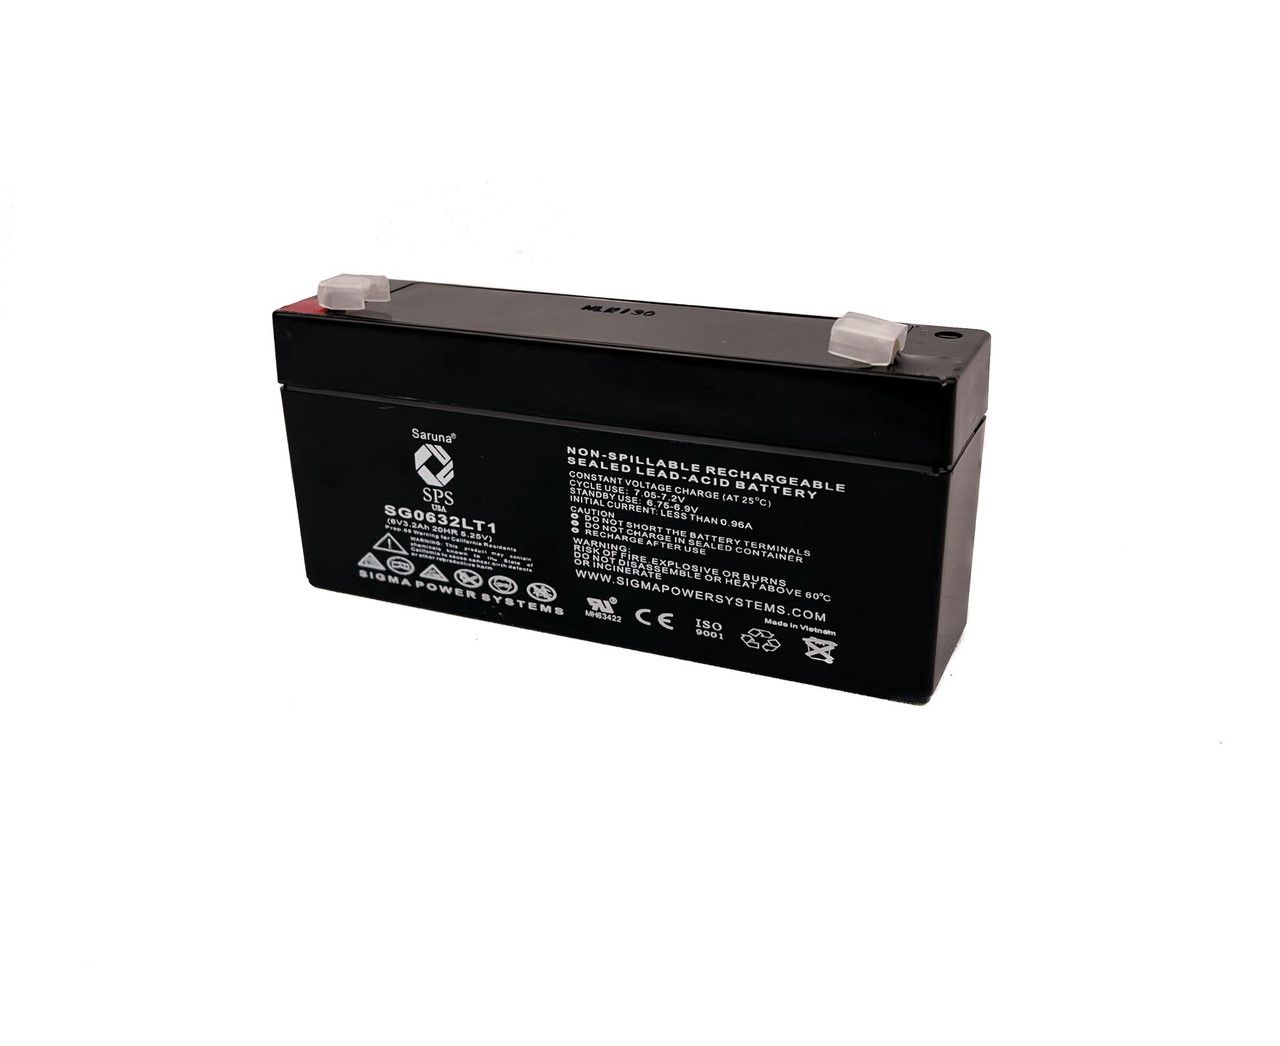 Raion Power 6V 3.2Ah Non-Spillable Replacement Rechargebale Battery for Wing ES 3.2-6